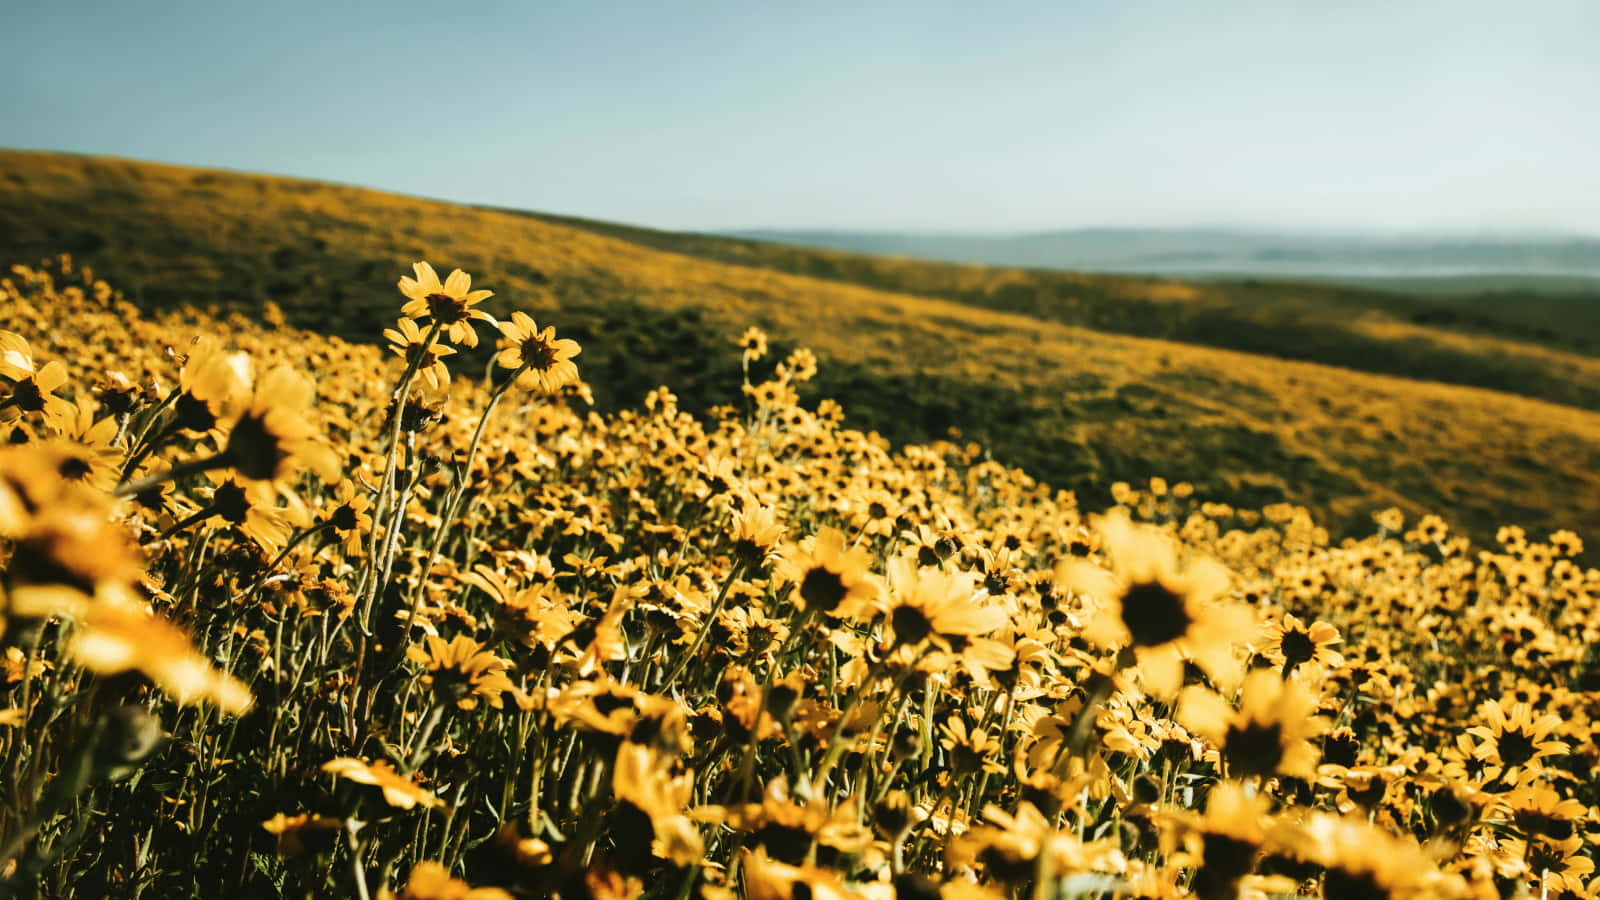 A Field Of Sunflowers In The Middle Of A Hill Background